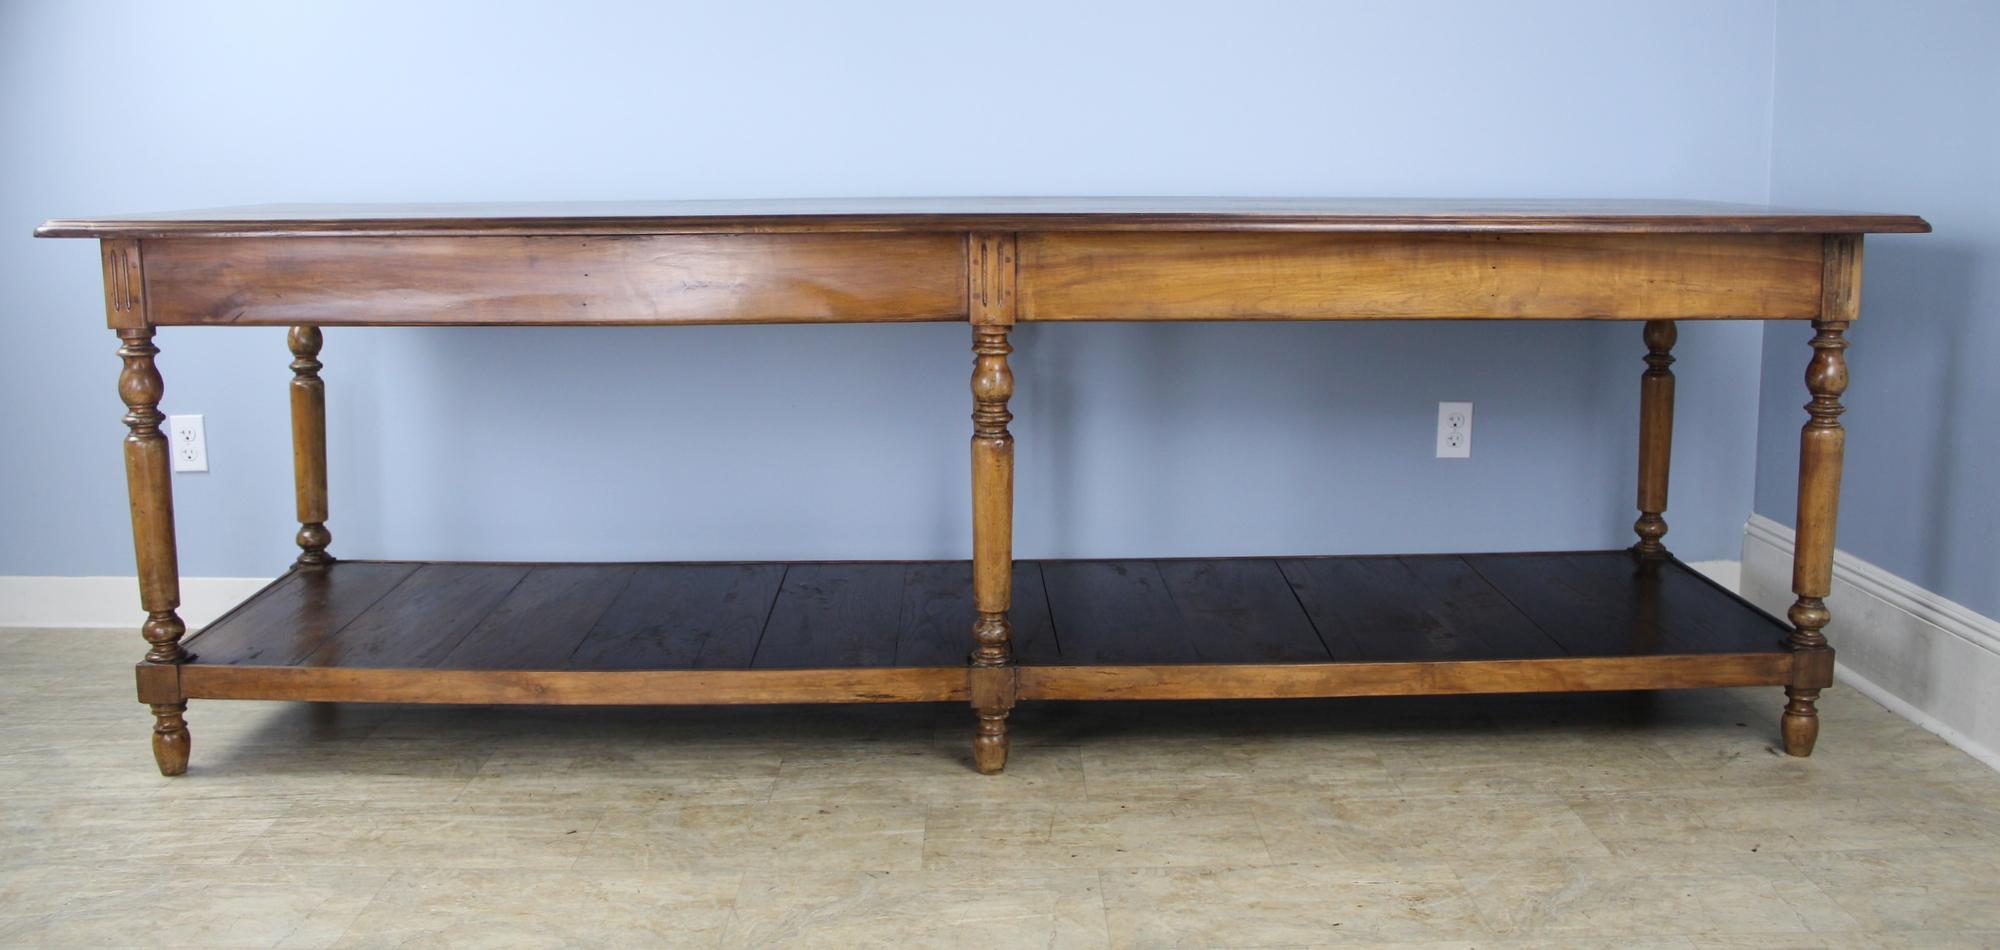 A very long, fabulous French walnut draper's table, originally for use by a tailor or seamstress. Legs have good turned detail and nice patina. Top has been refinished for a smooth clean look. Would work well as a room divider or as a kitchen